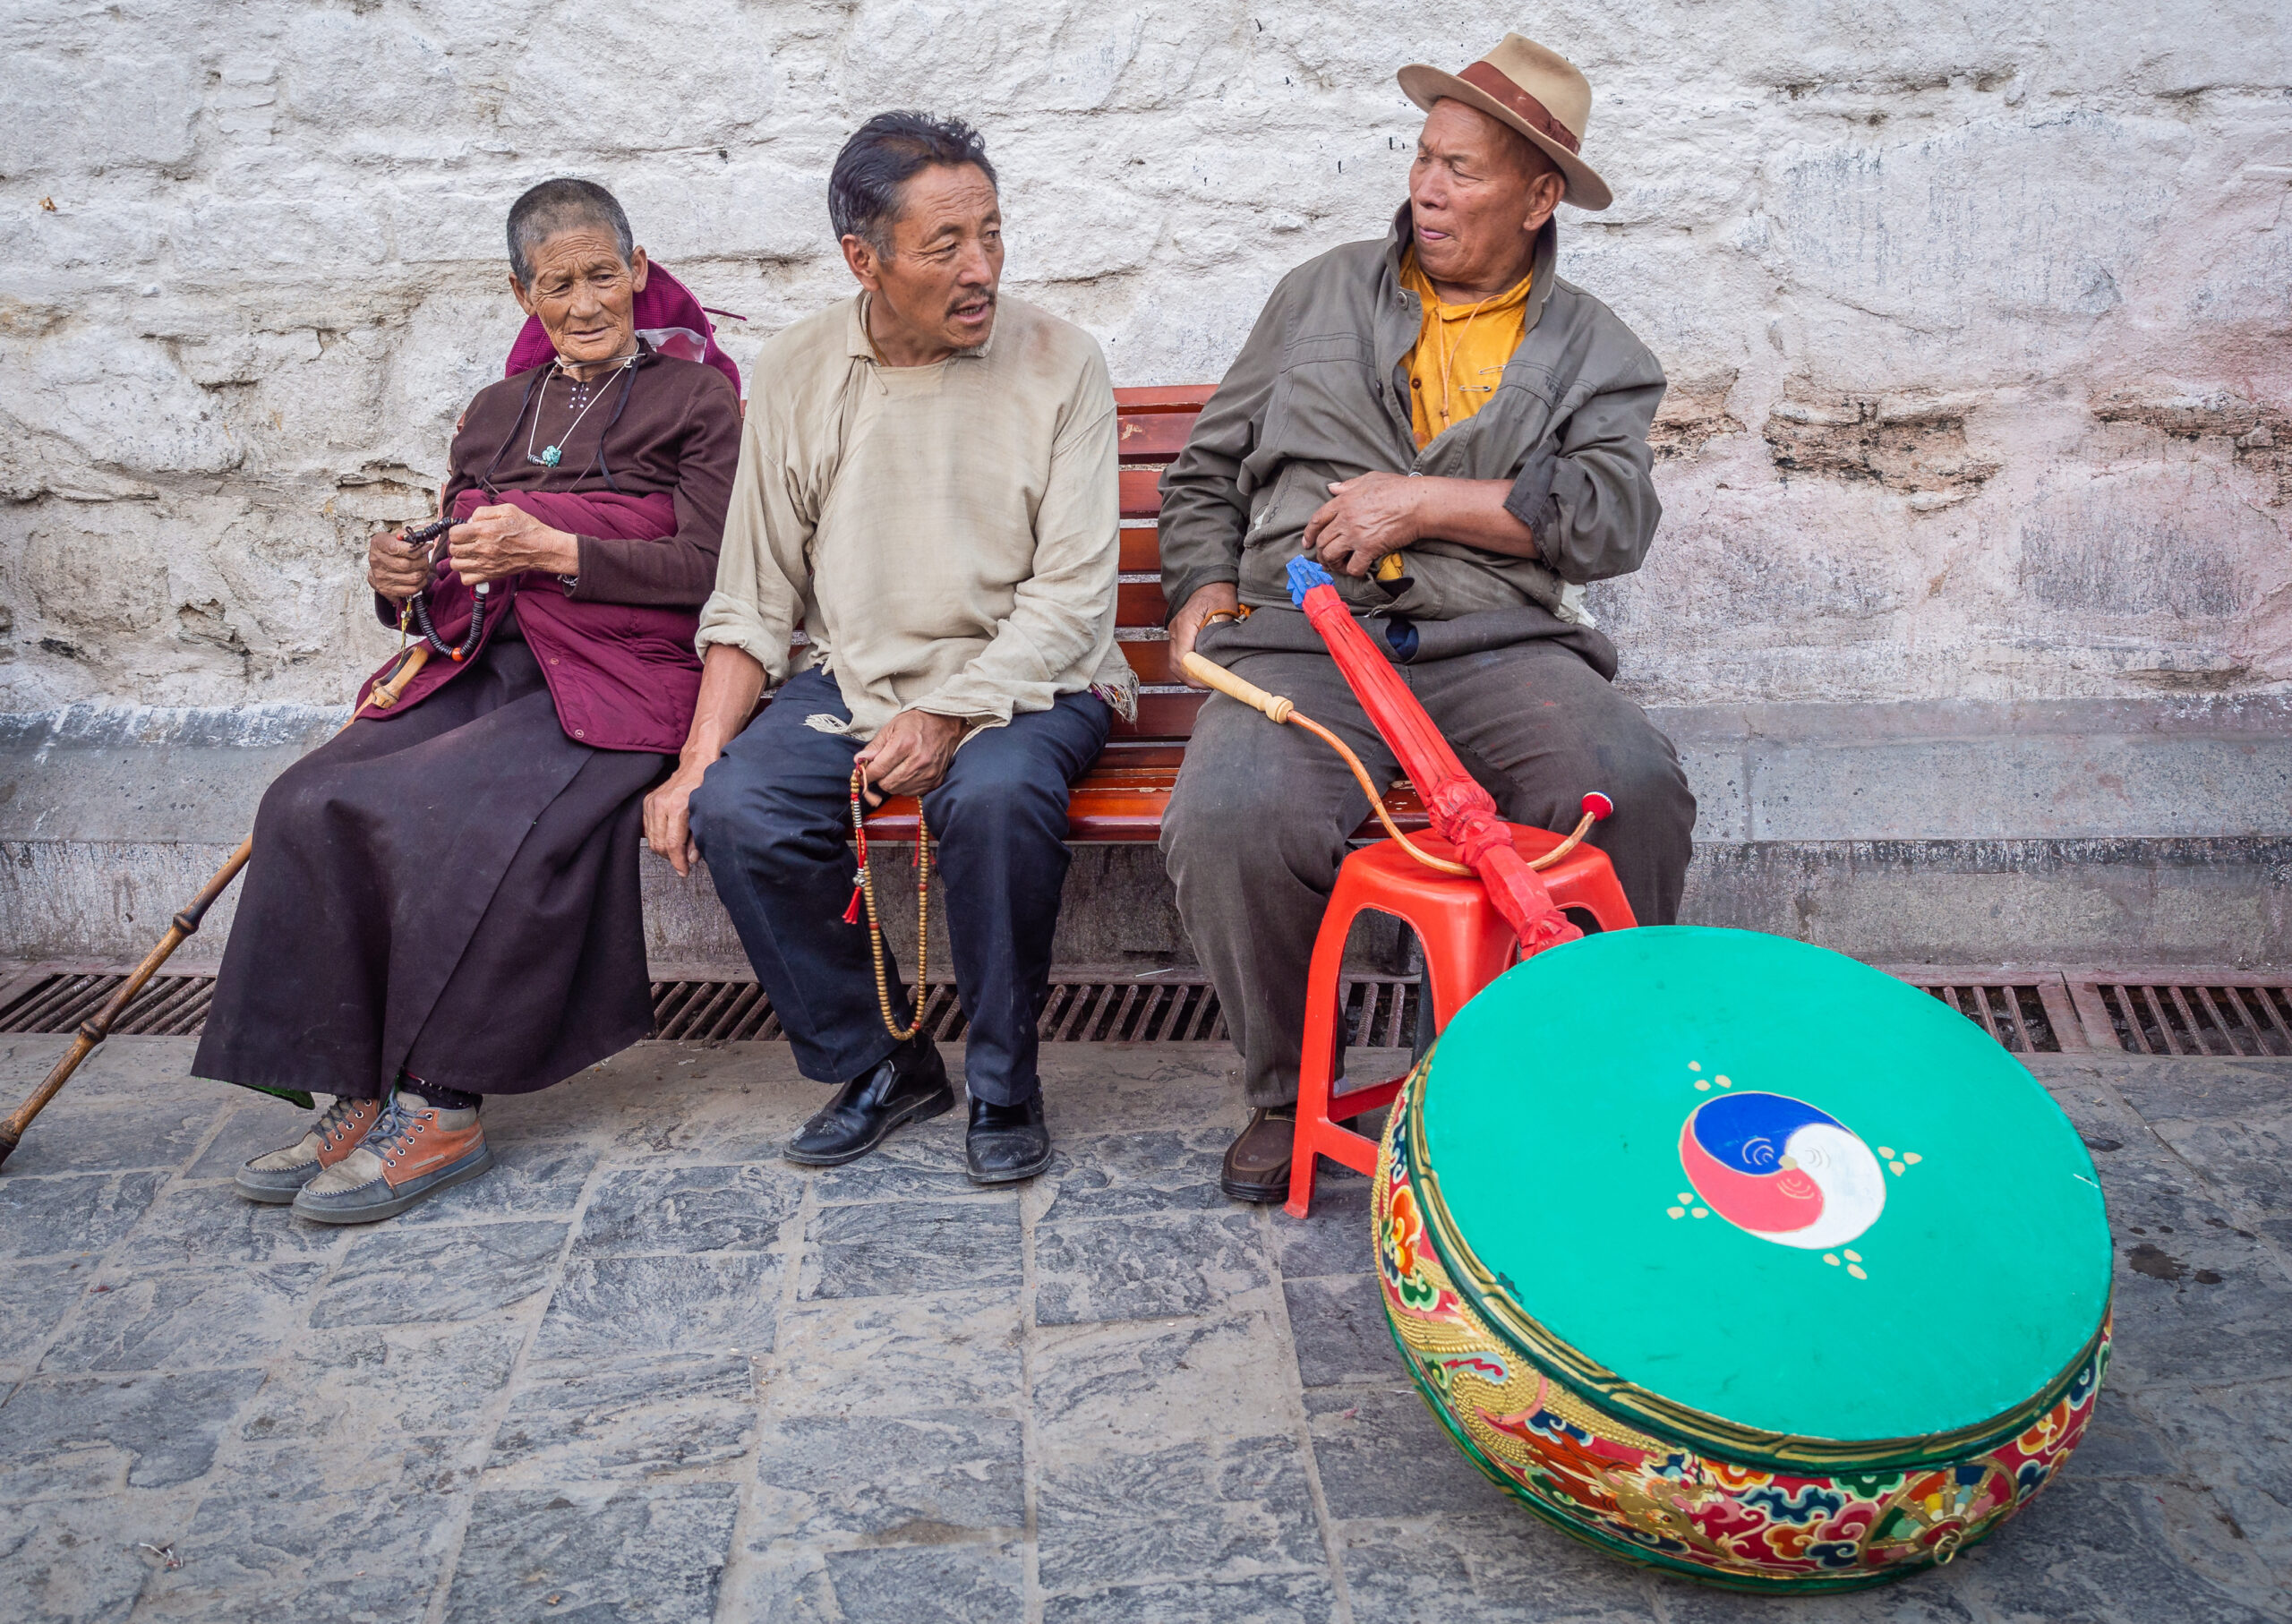 Tibet - August, 29 2014: Ethnic man and woman with beads looking at male with musical instrument while sitting on bench on town street